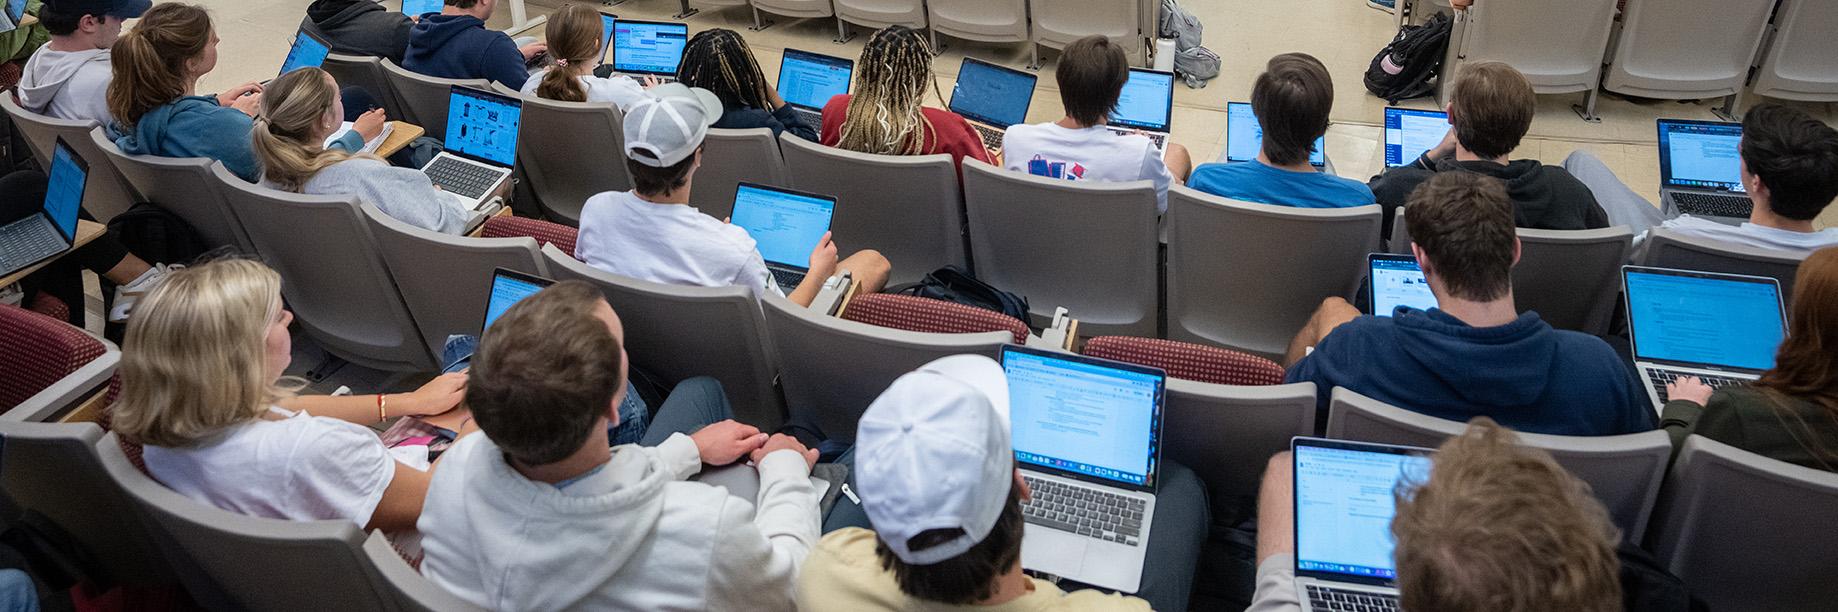 Students sitting in a lecture hall with laptops on their laps